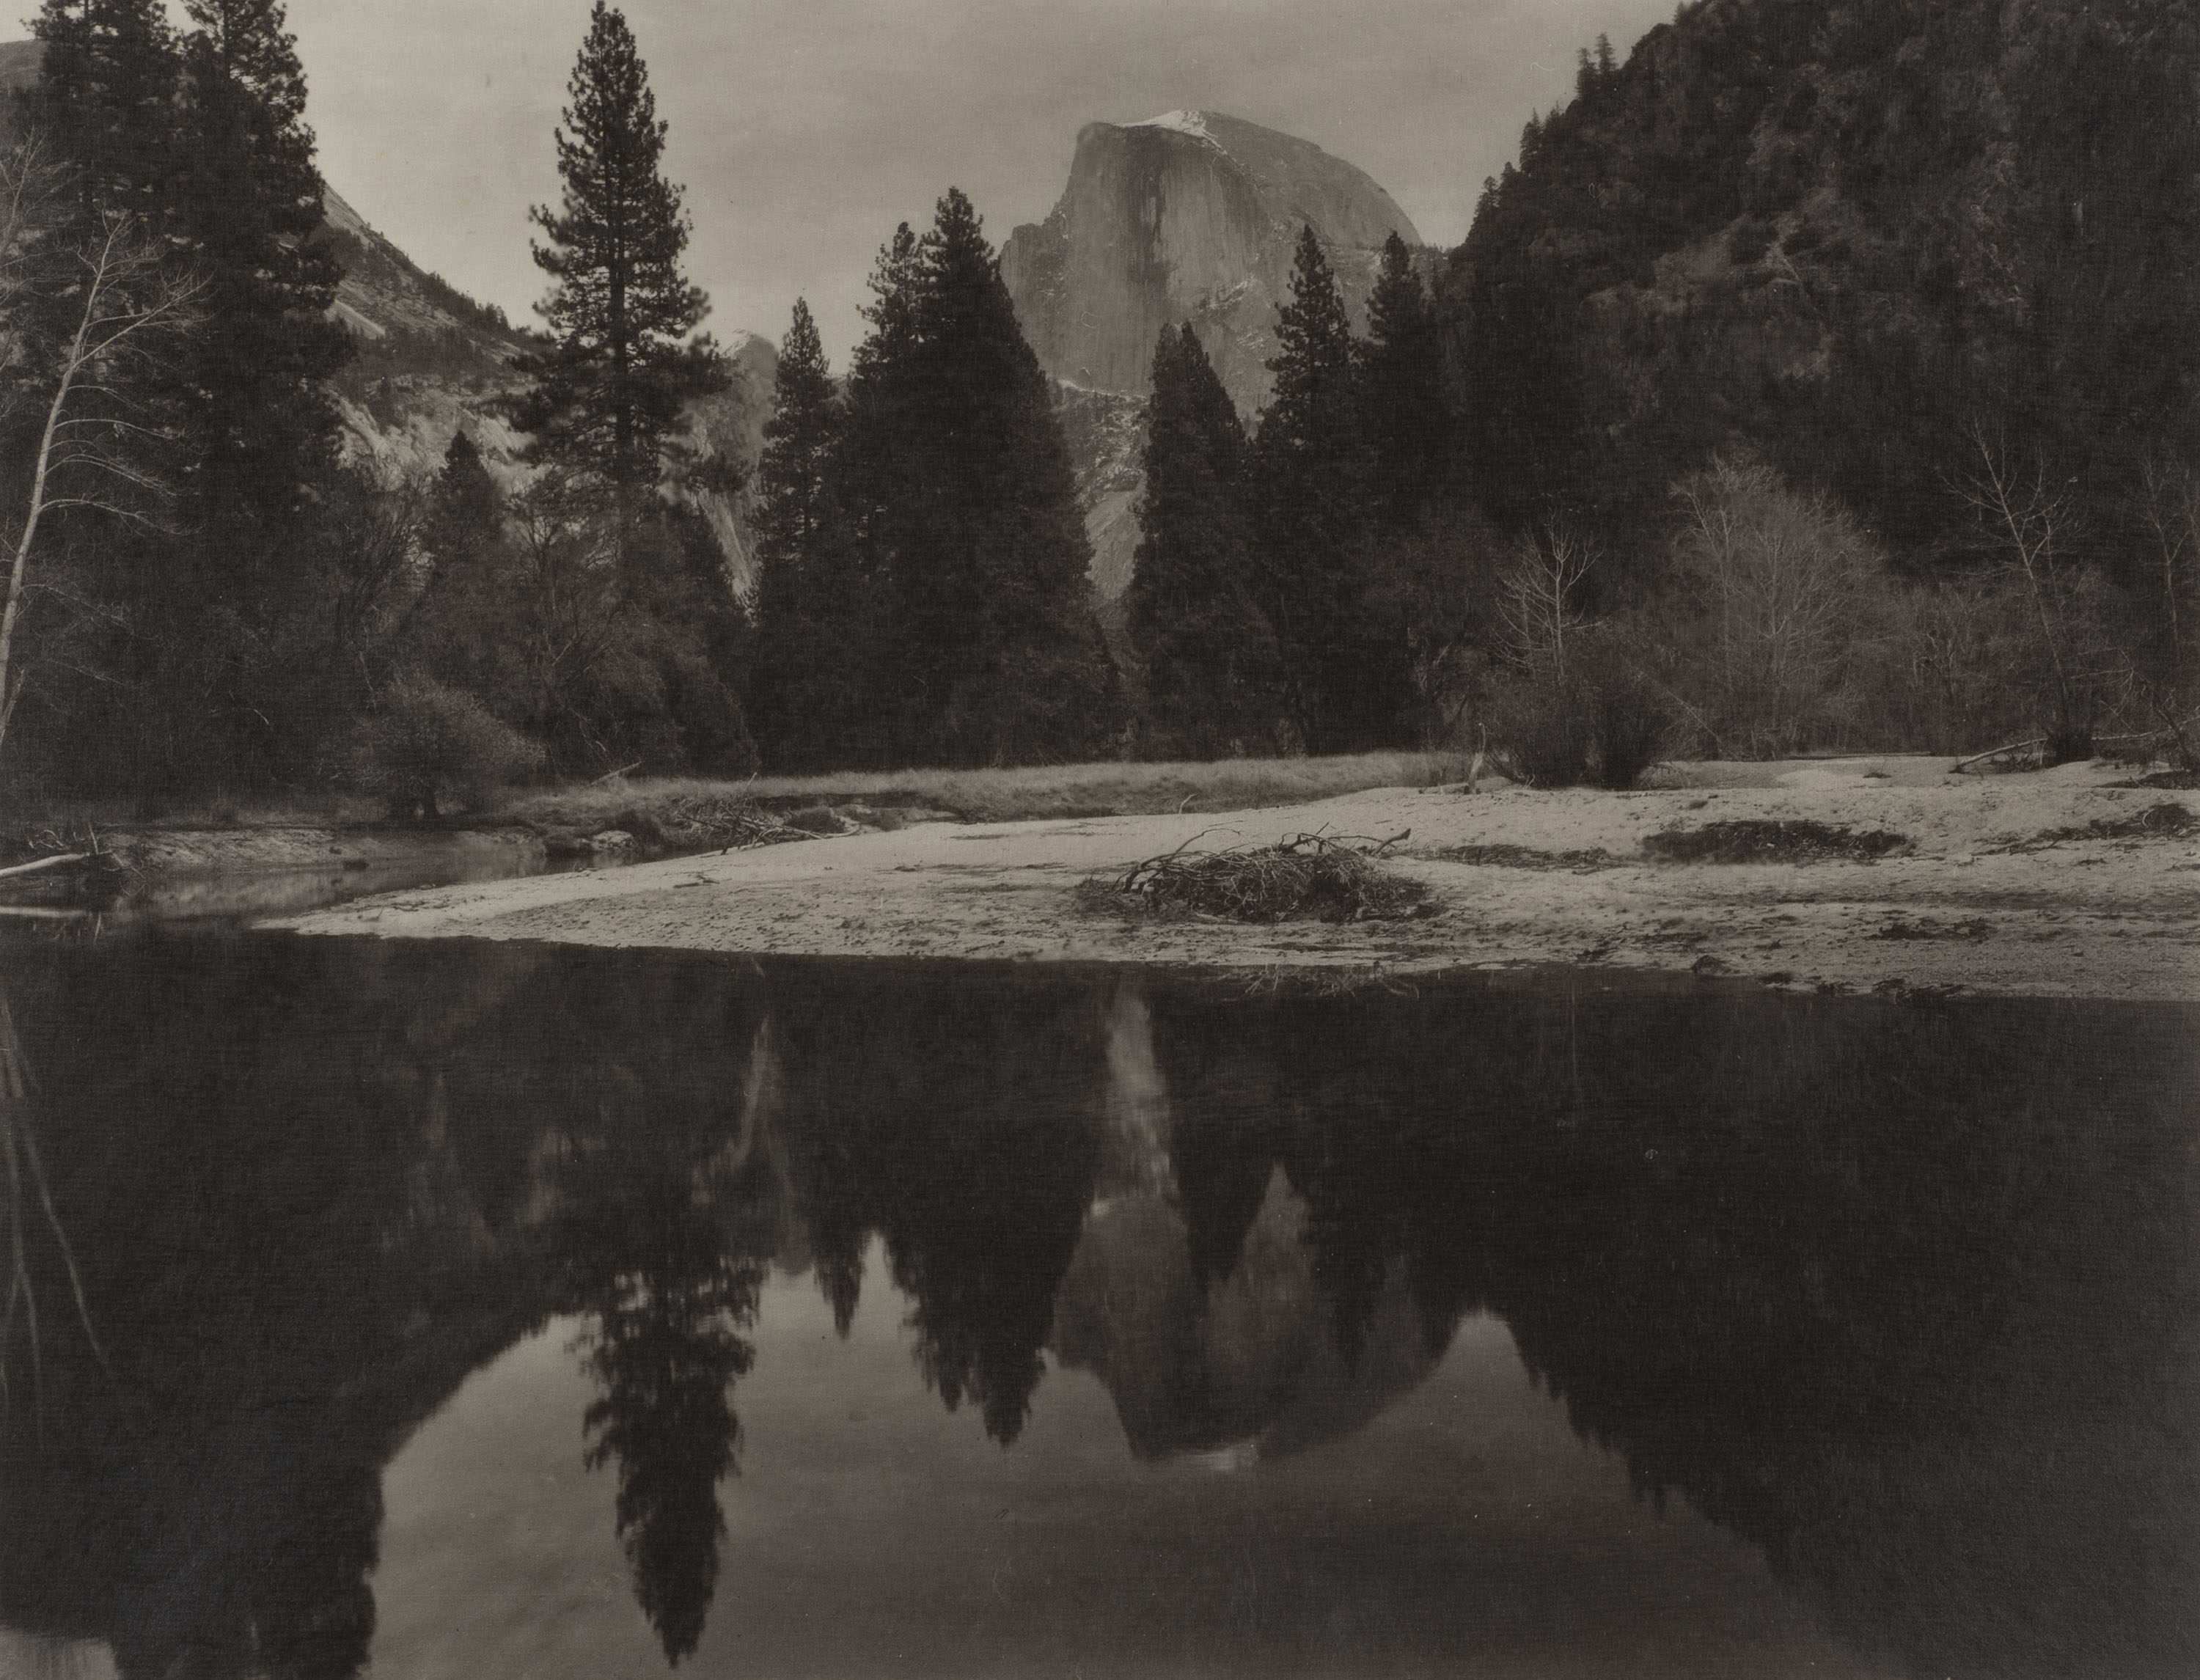 Detail from “Silent Respiration of Forests-Yosemite: Yosemite #23” by Japanese photographer Takeshi Shikama, featured in his current solo exhibition in Hong Kong. Photo: Takeshi Shikama, courtesy of Boogie Woogie Photography